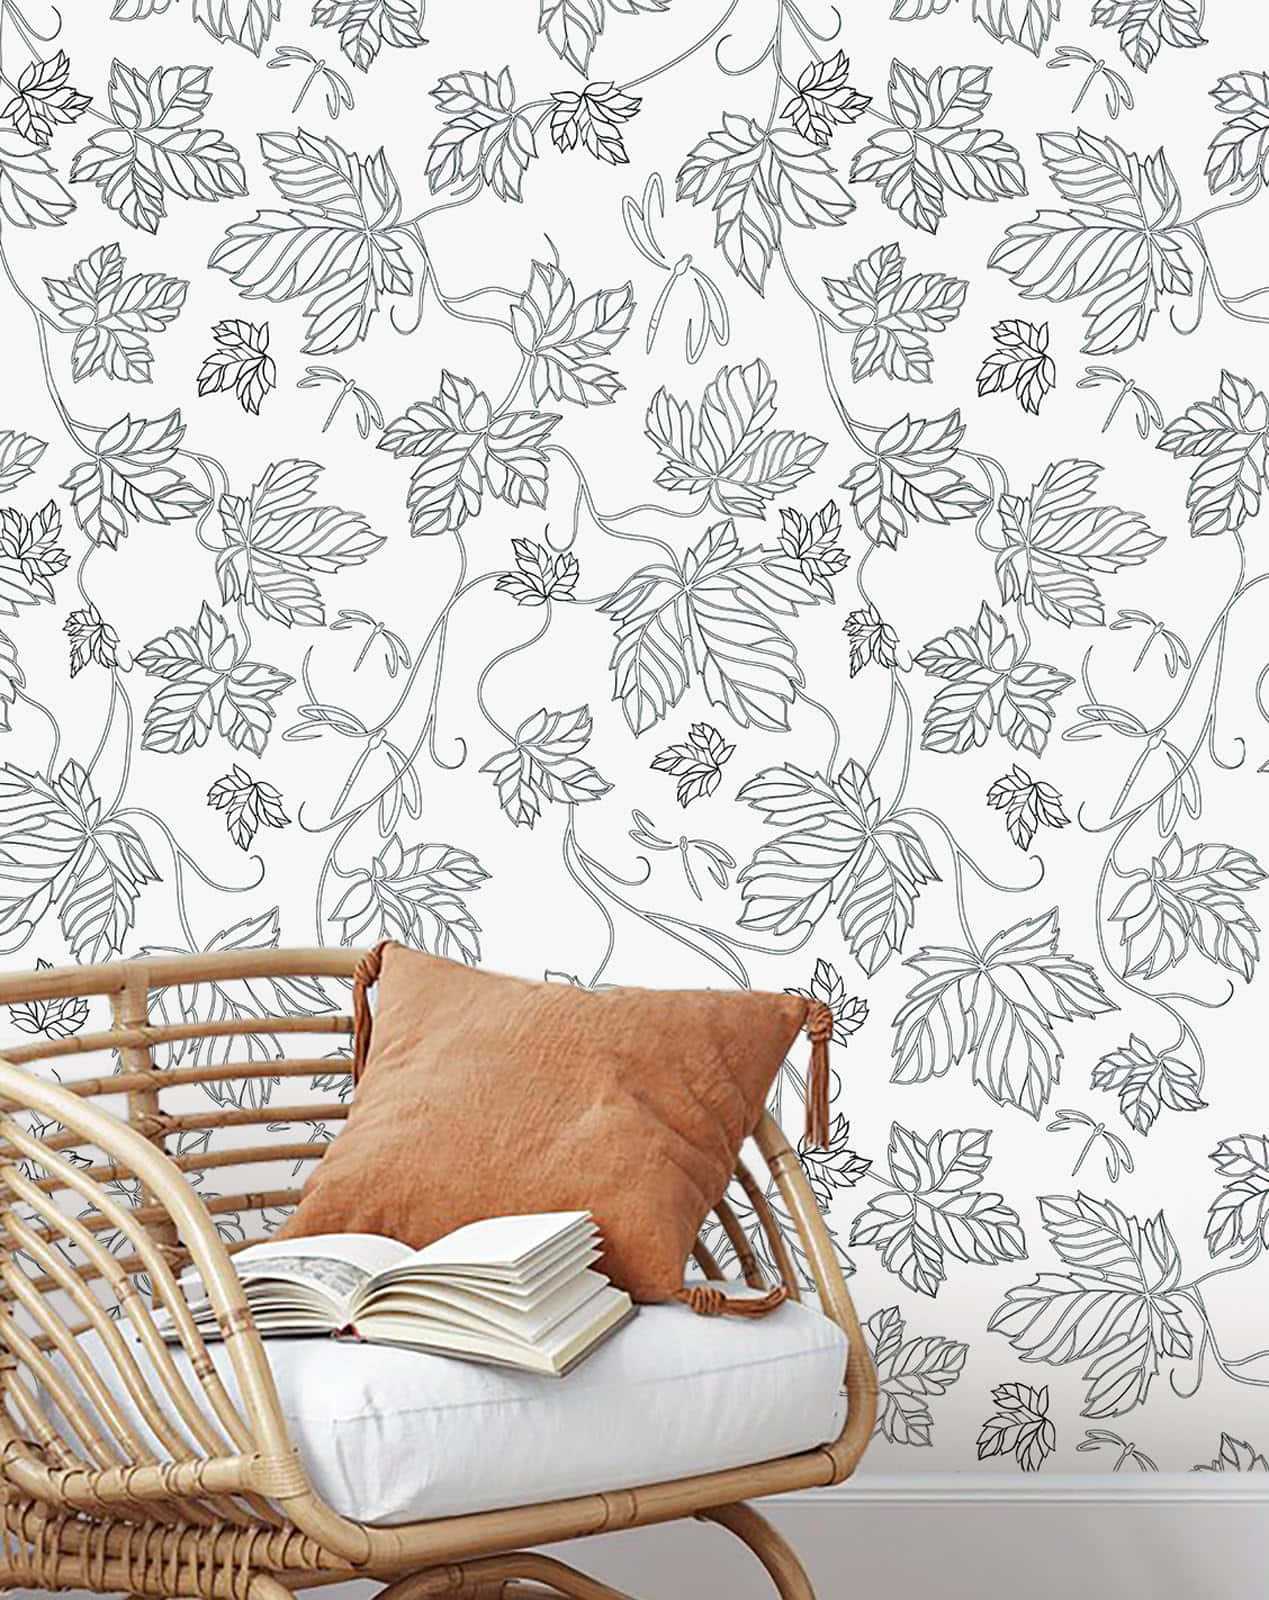 Neutral Floral Wallpaperwith Rattan Chair Wallpaper